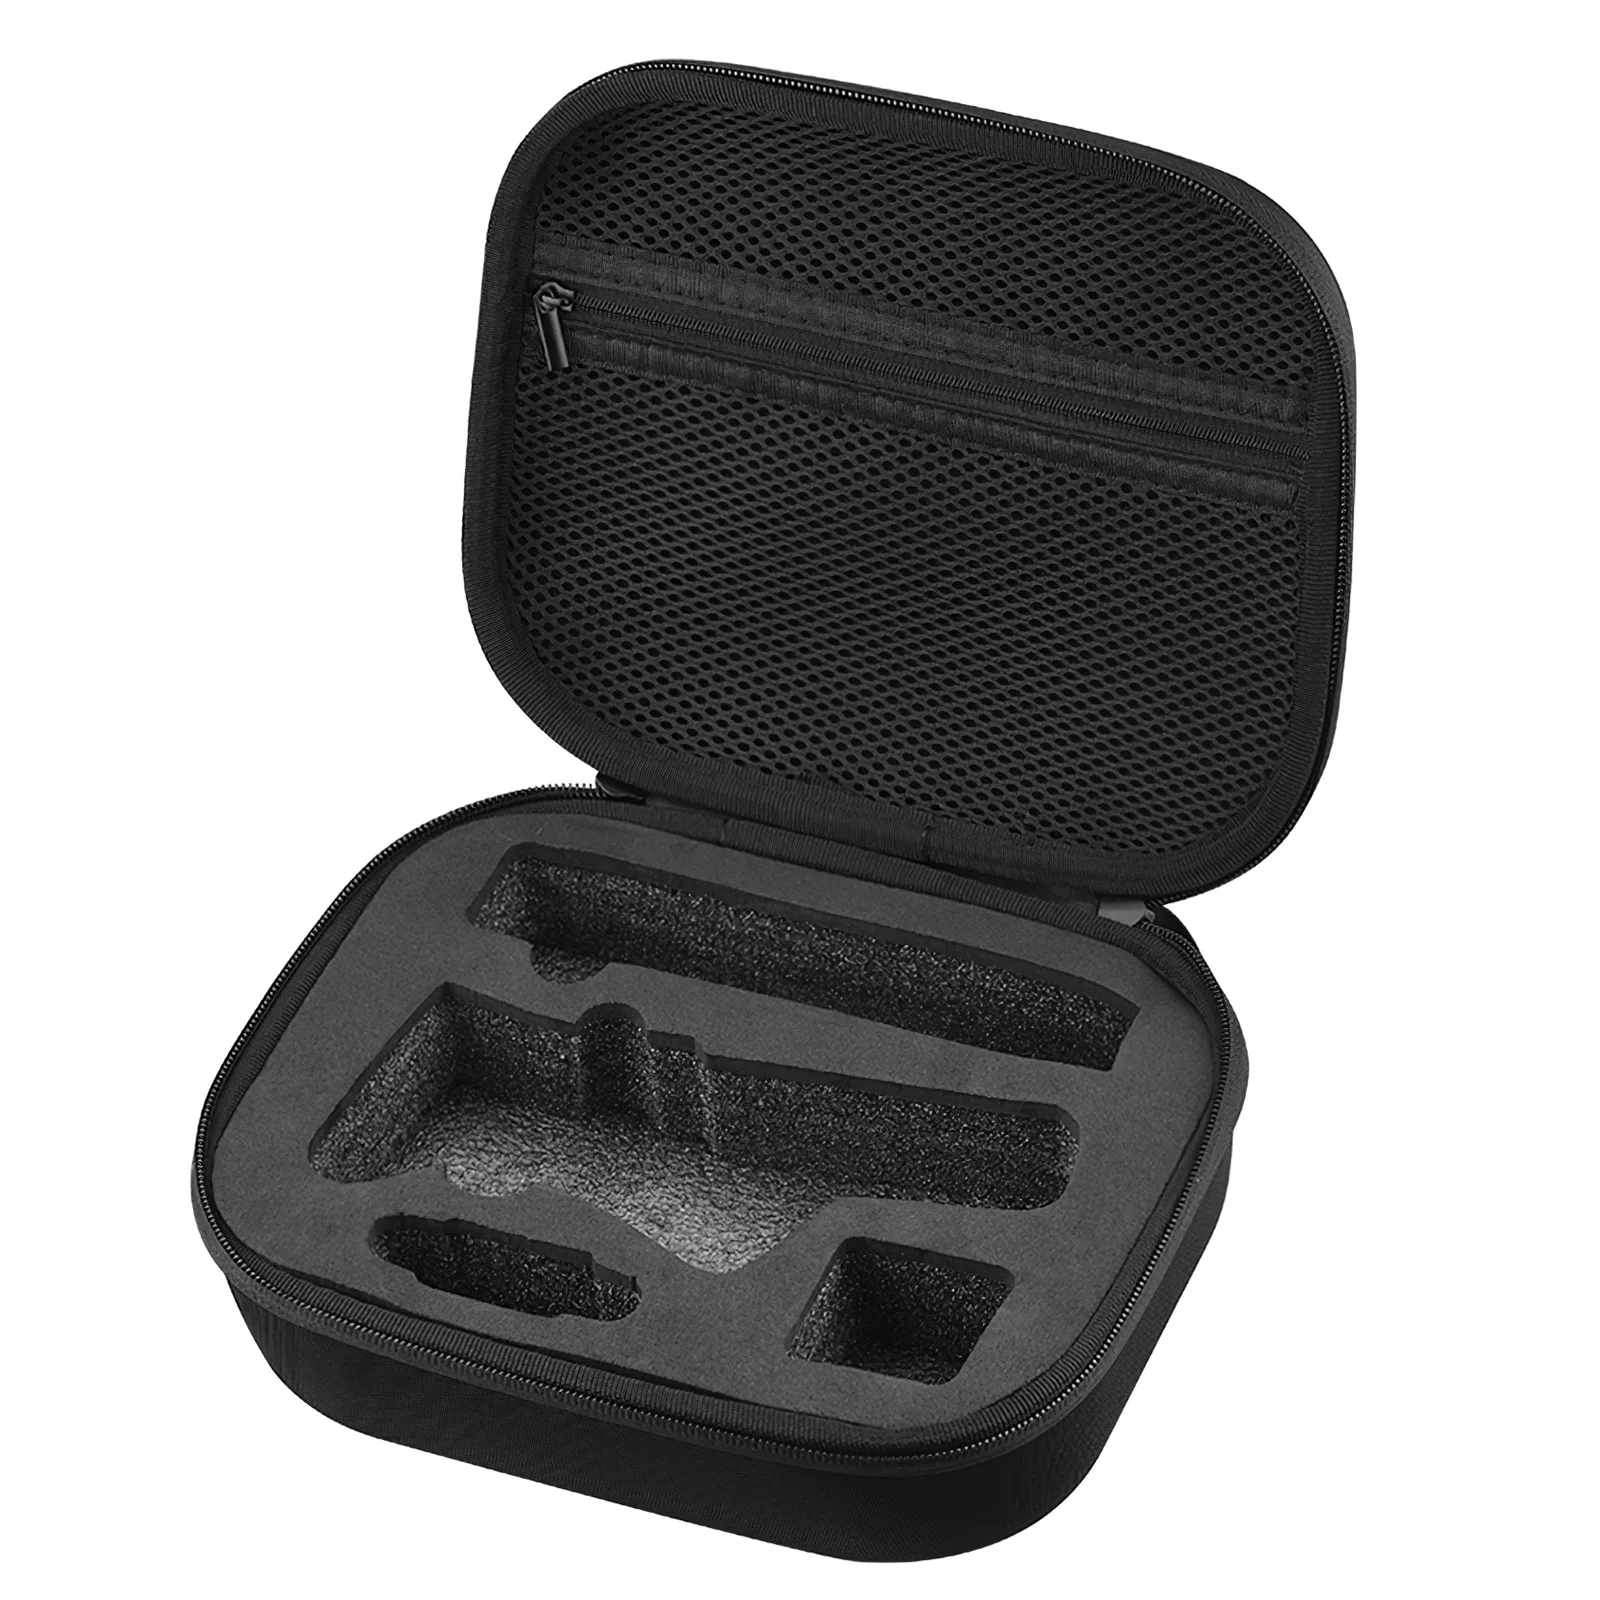 

Portable Carrying Case Lightweight Storage Case With Two Way Zippers For Activities Compatible Bag Black Handheld Storage Bag